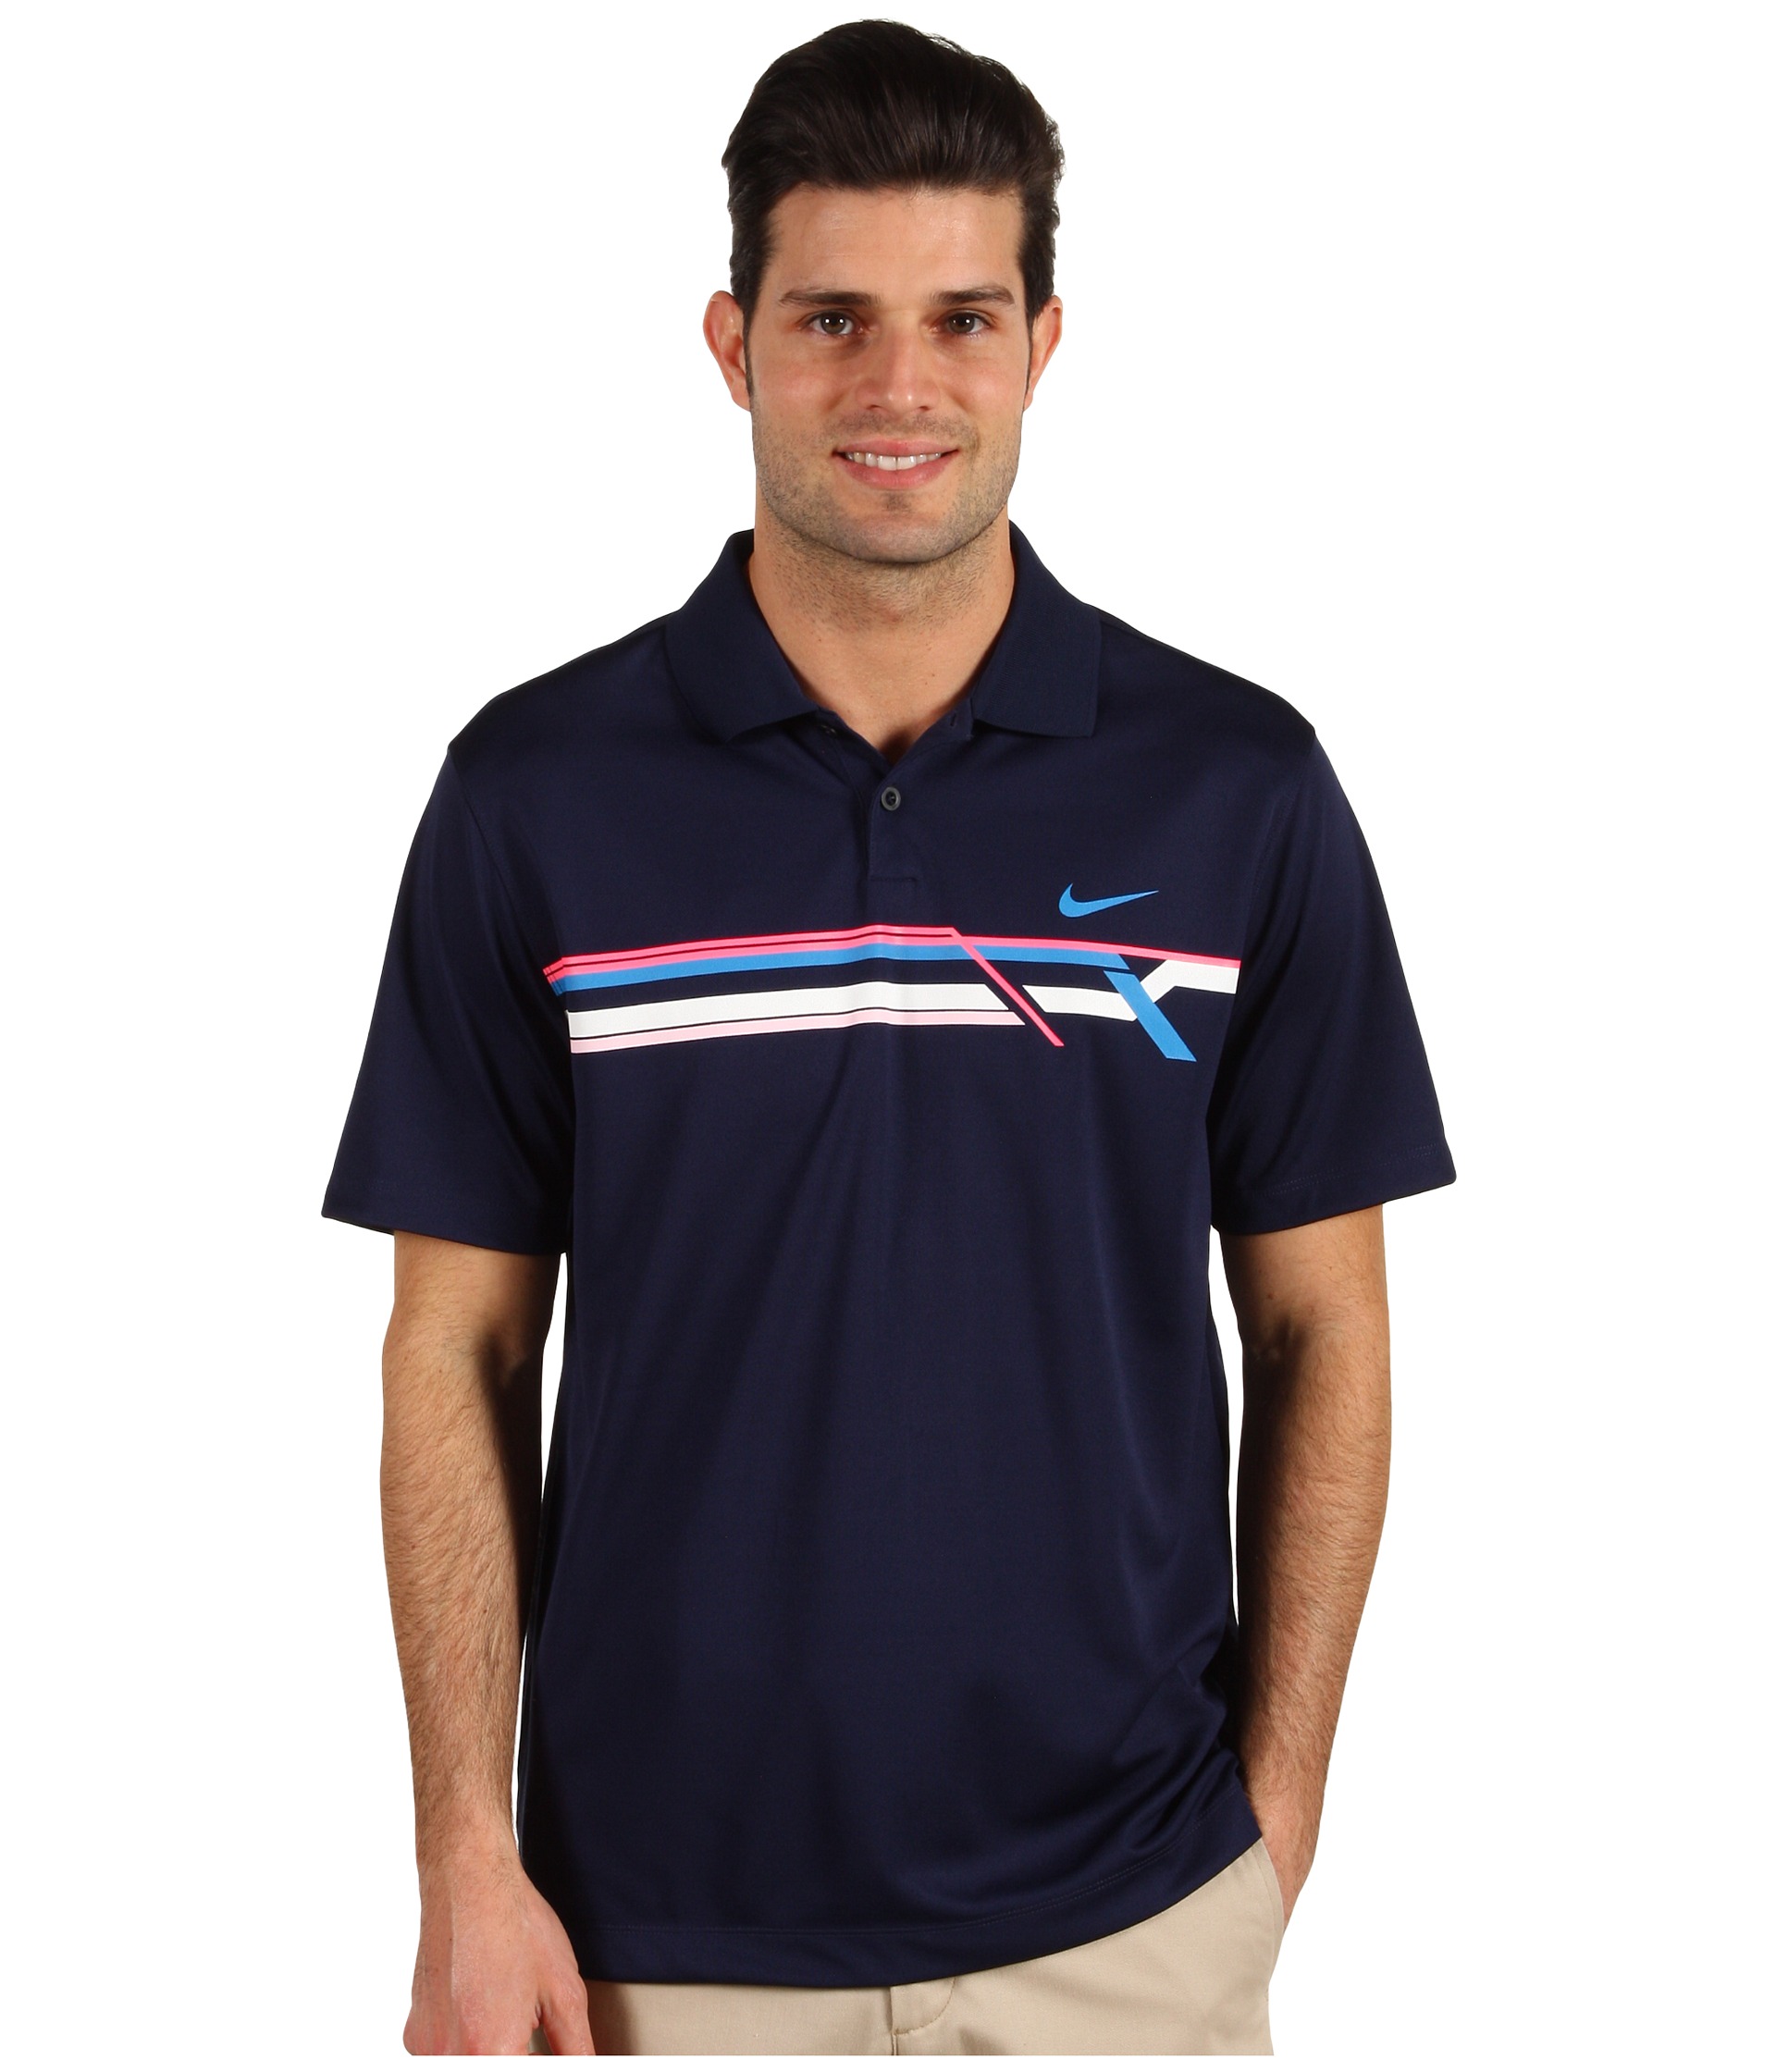 Nike Golf   Fractured Chest Stripe Polo Shirt